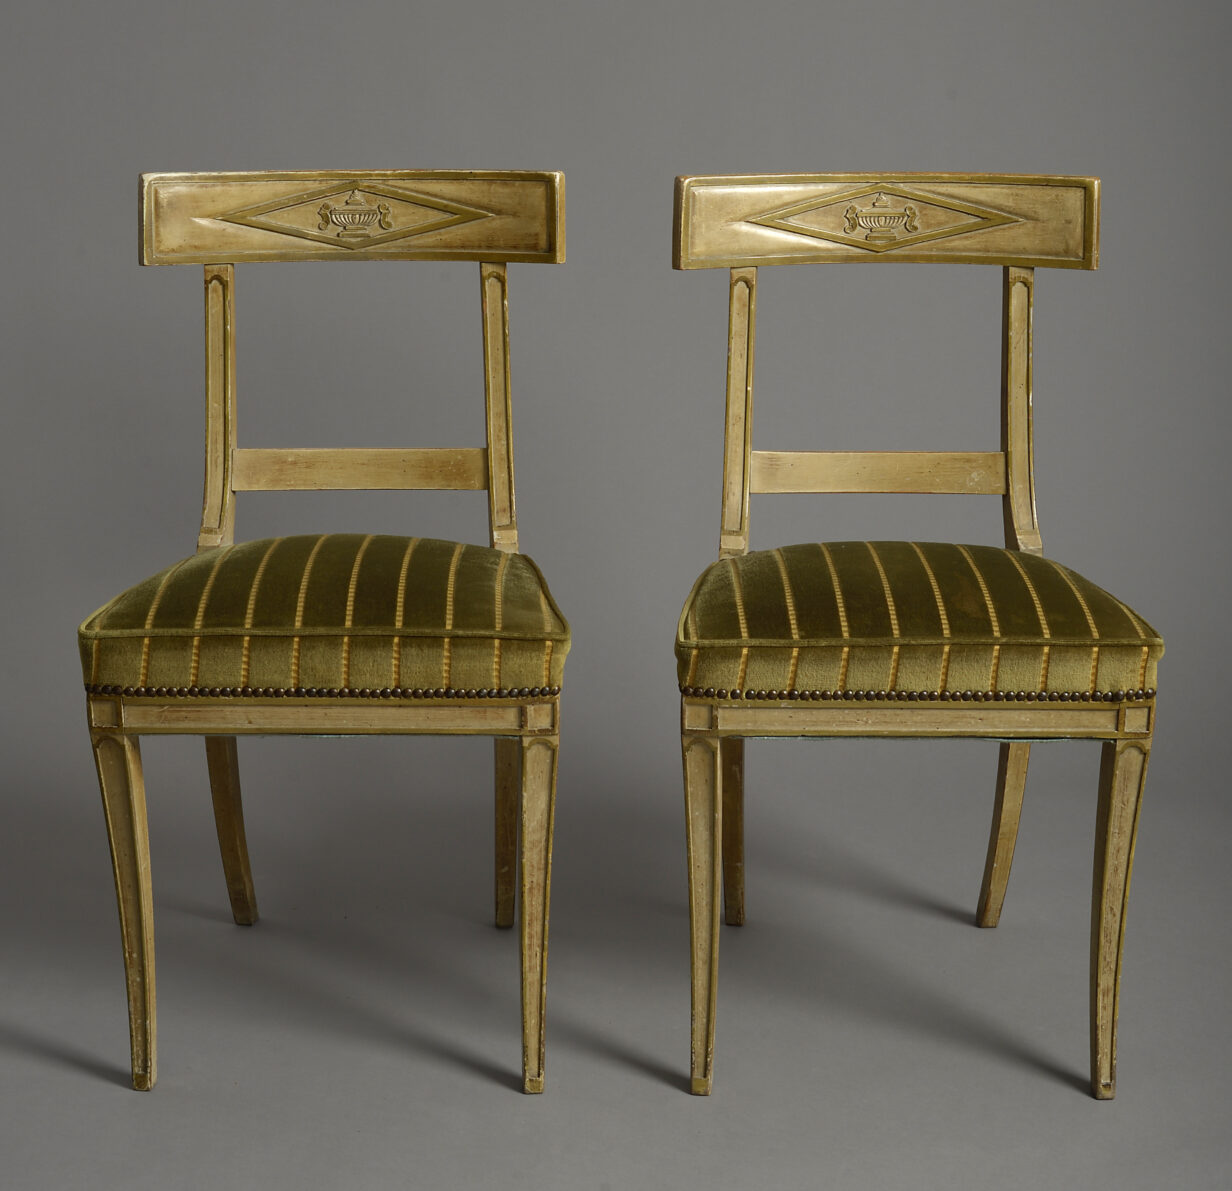 Pair of early 19th century painted empire period side chairs